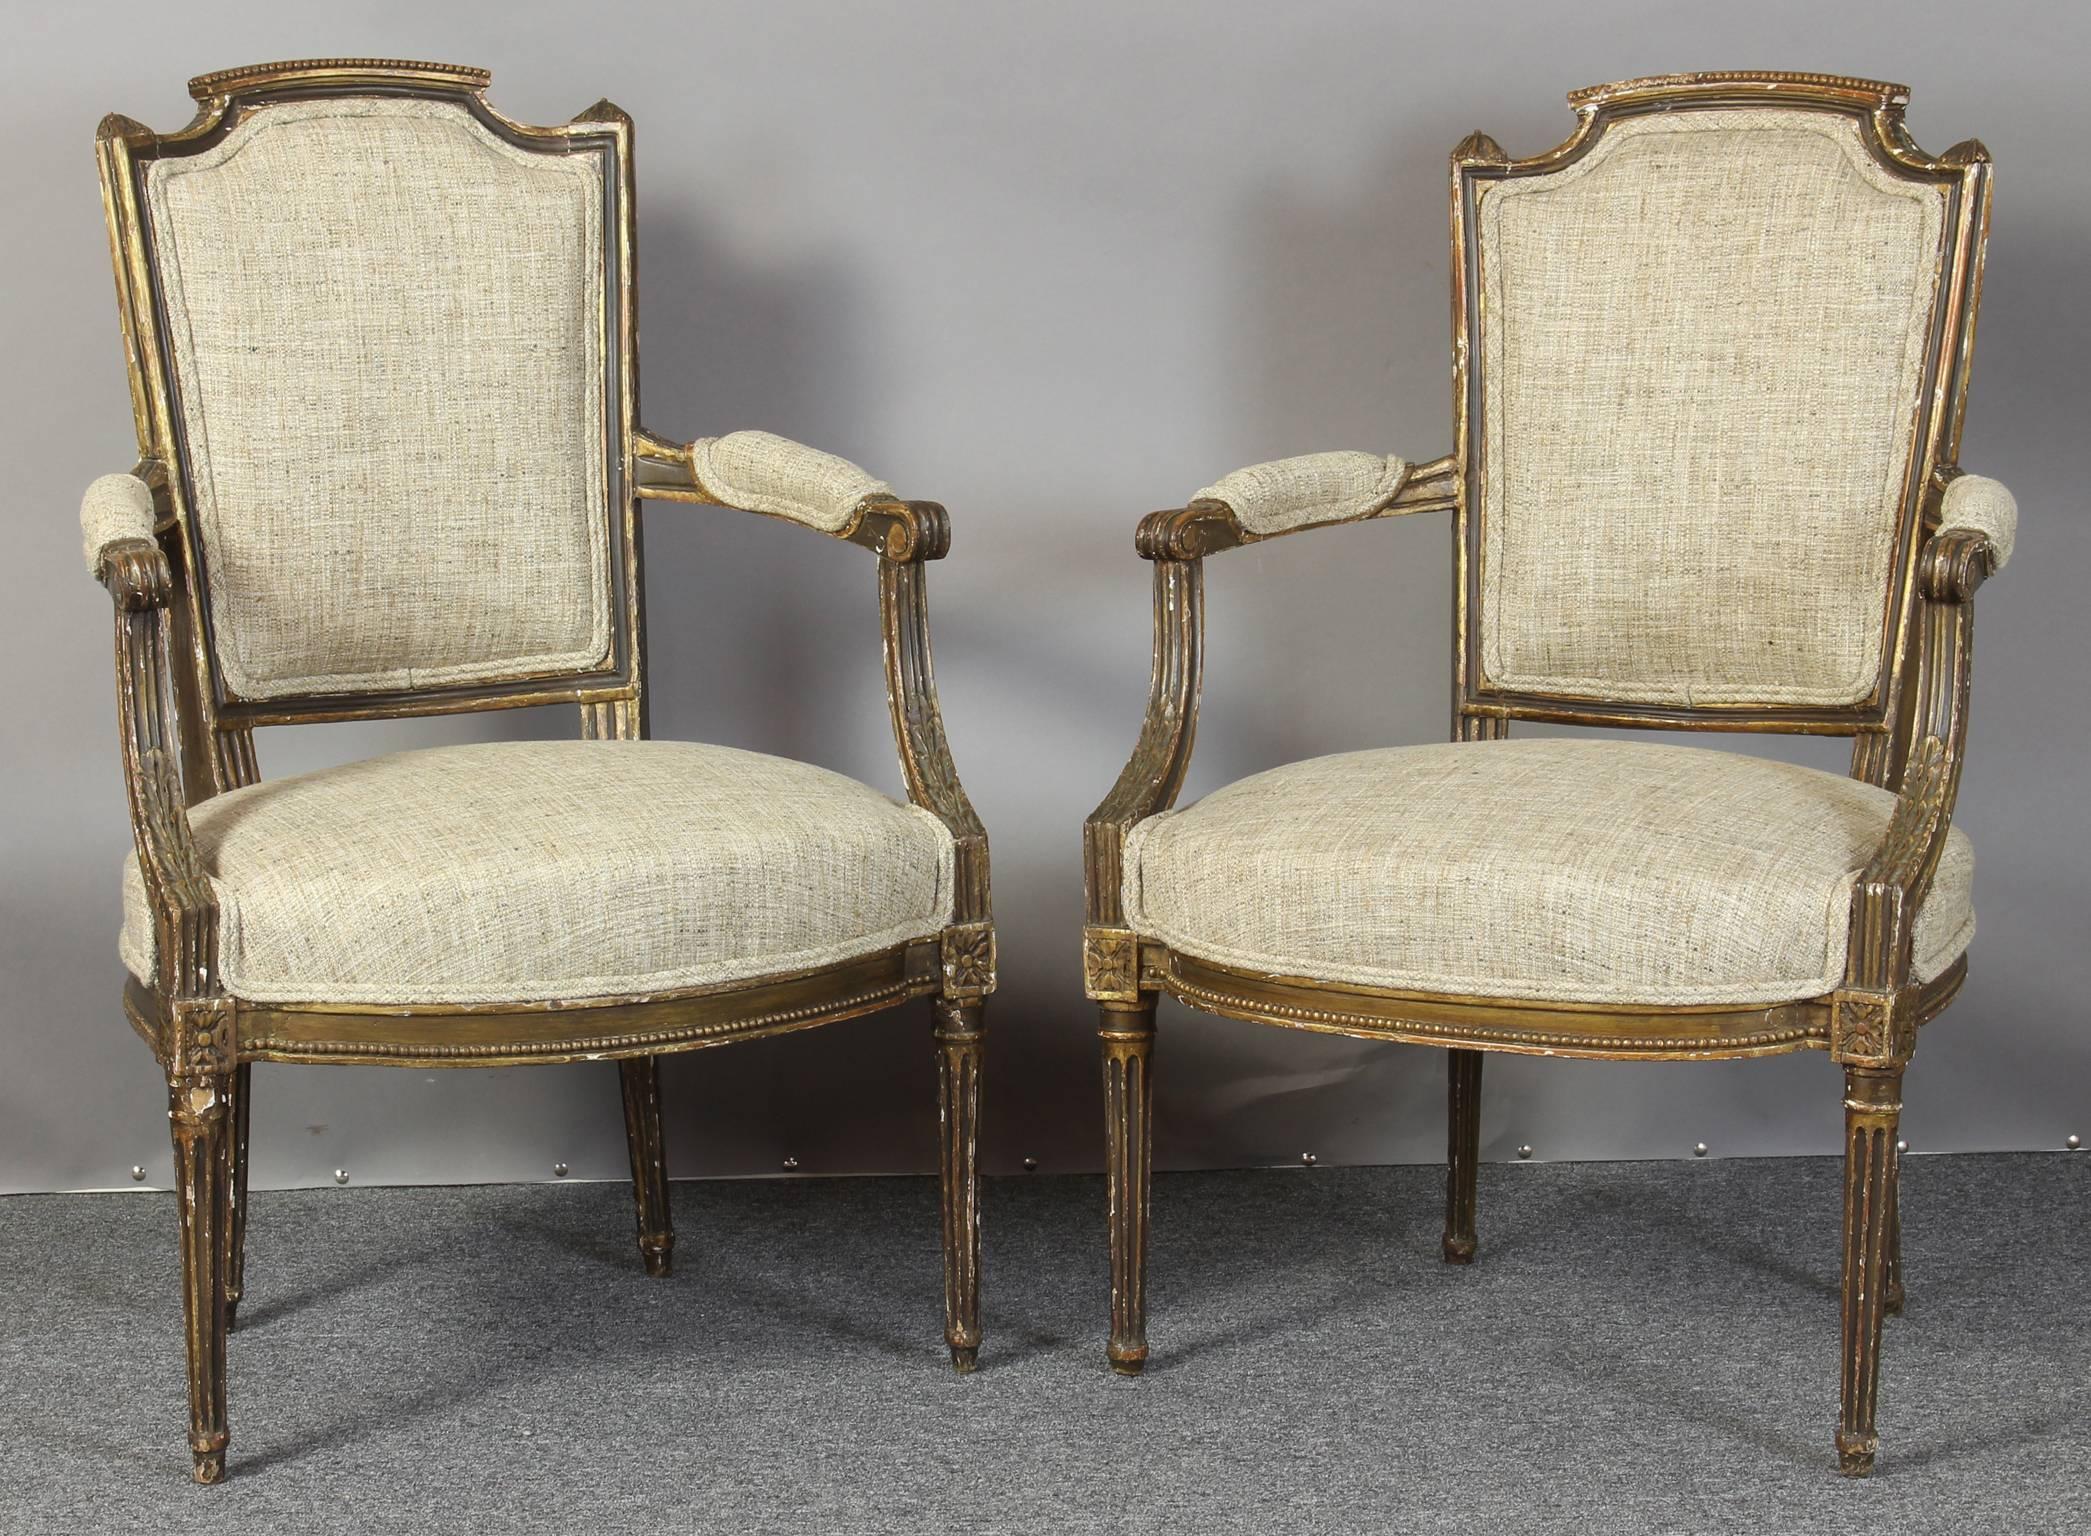 An exceptional late 18th C. French gilt and ebonized fauteuils newly upholstered in a neutral color Italian linen fabric.